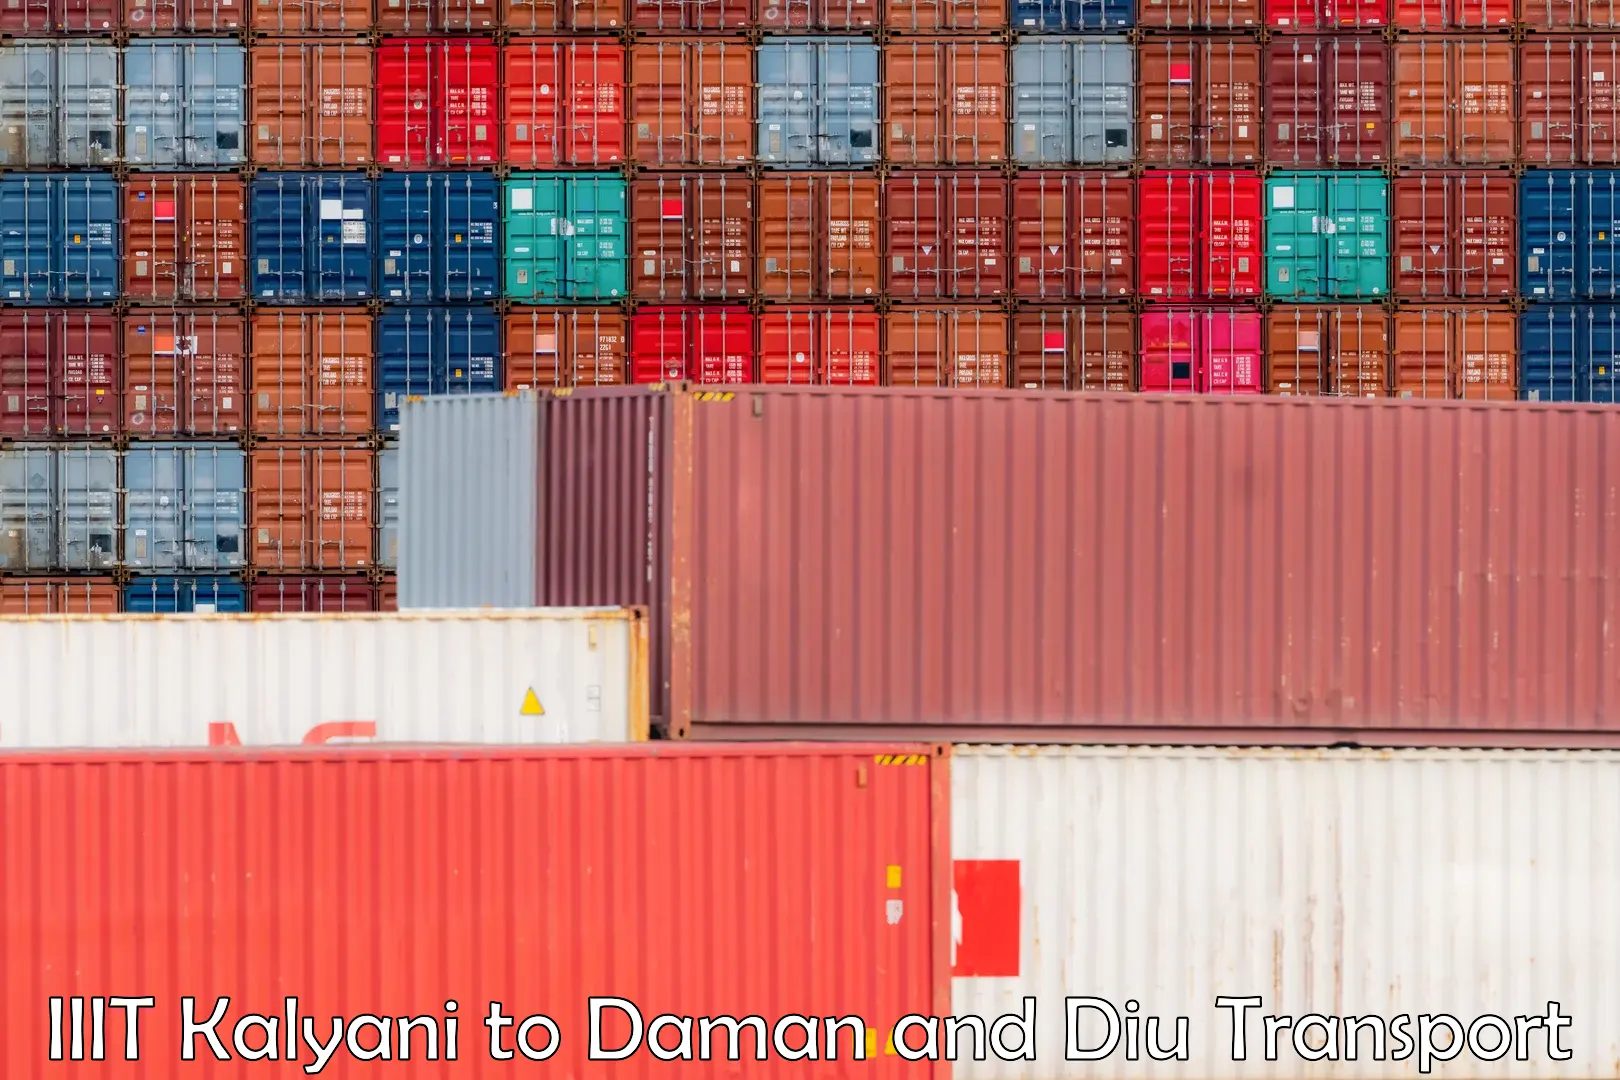 Container transportation services in IIIT Kalyani to Daman and Diu